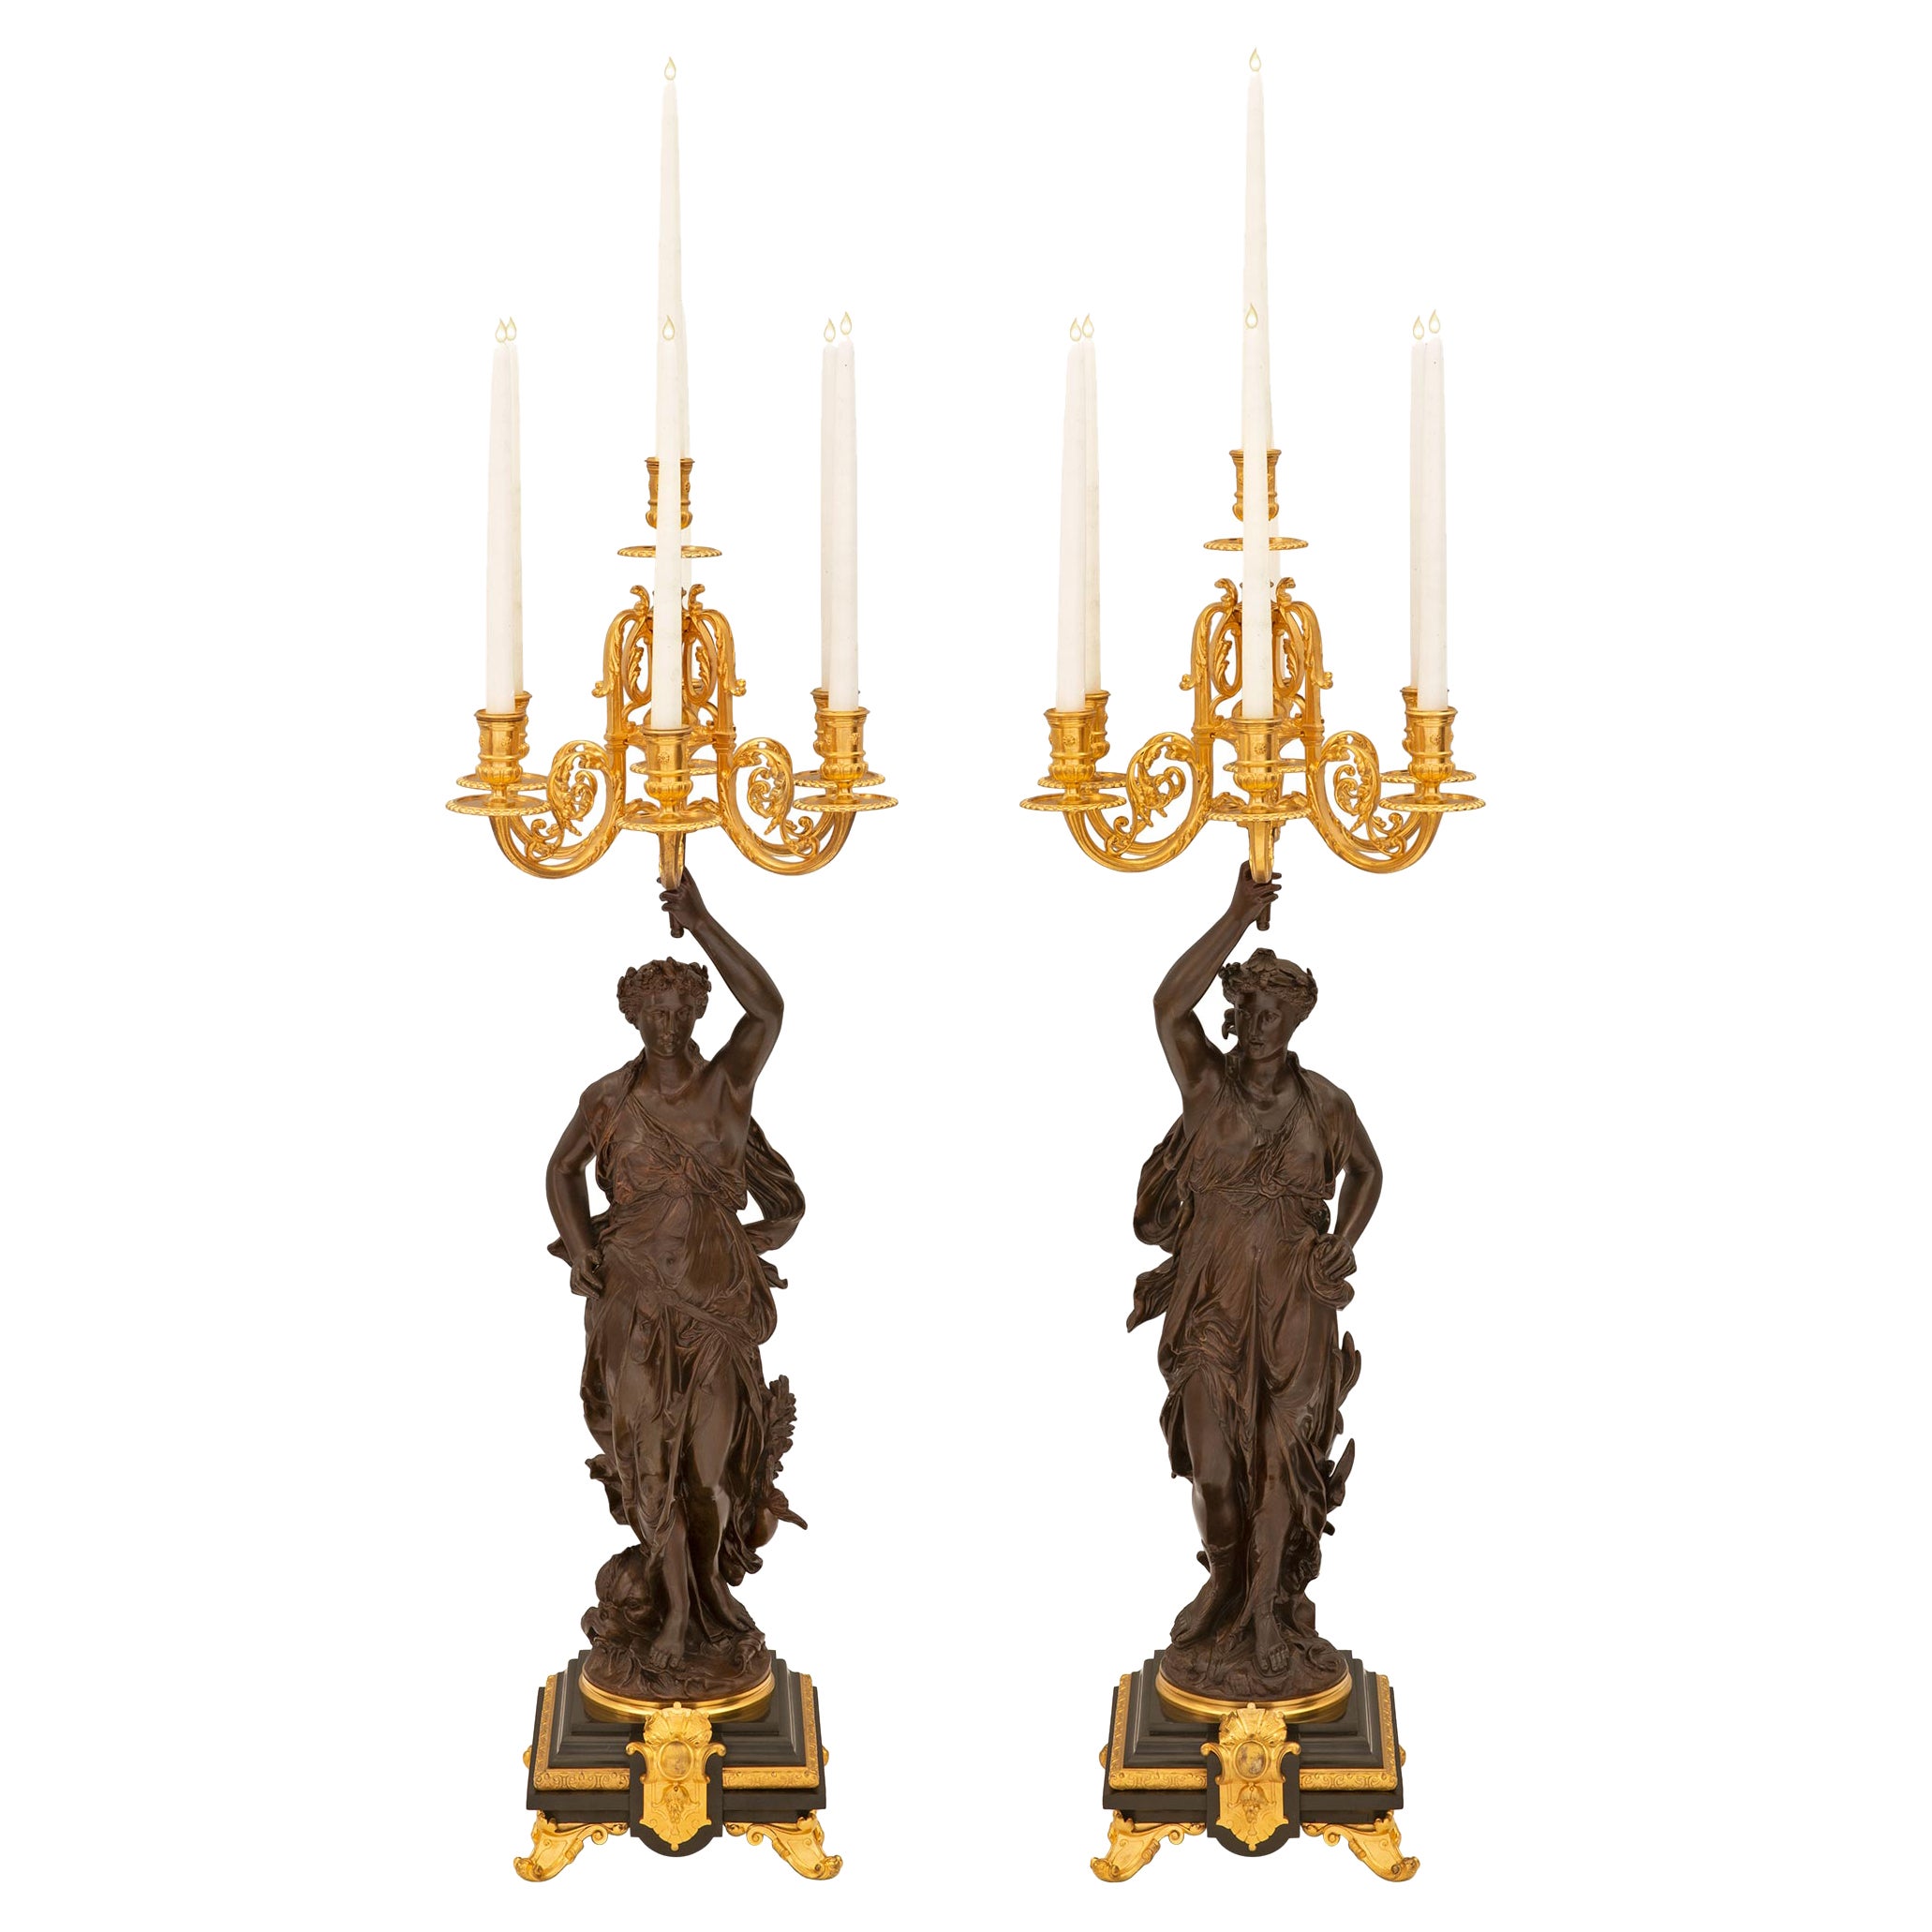 Pair of French 19th Century Renaissance St. Bronze, Ormolu, & Marble Candelbras For Sale